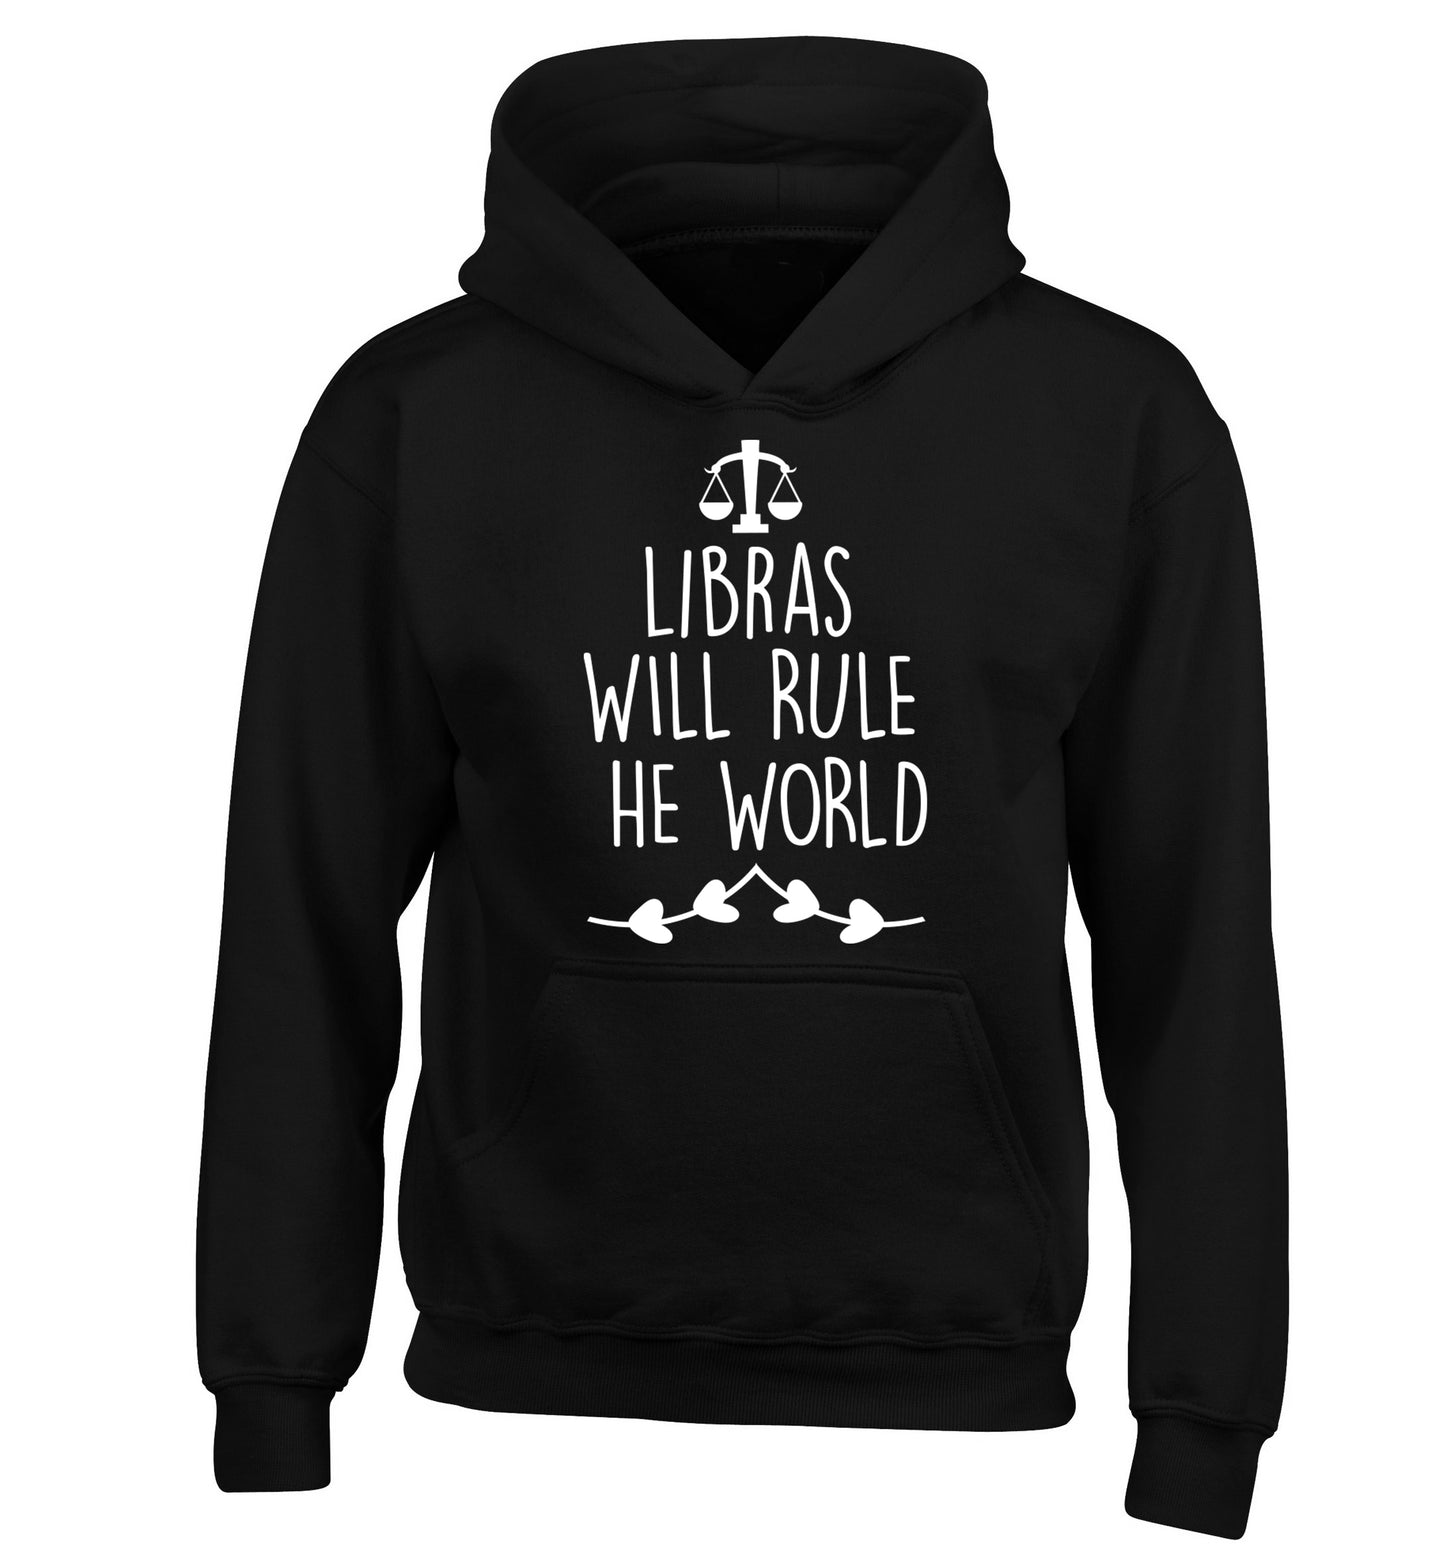 Libras will rule the world children's black hoodie 12-13 Years